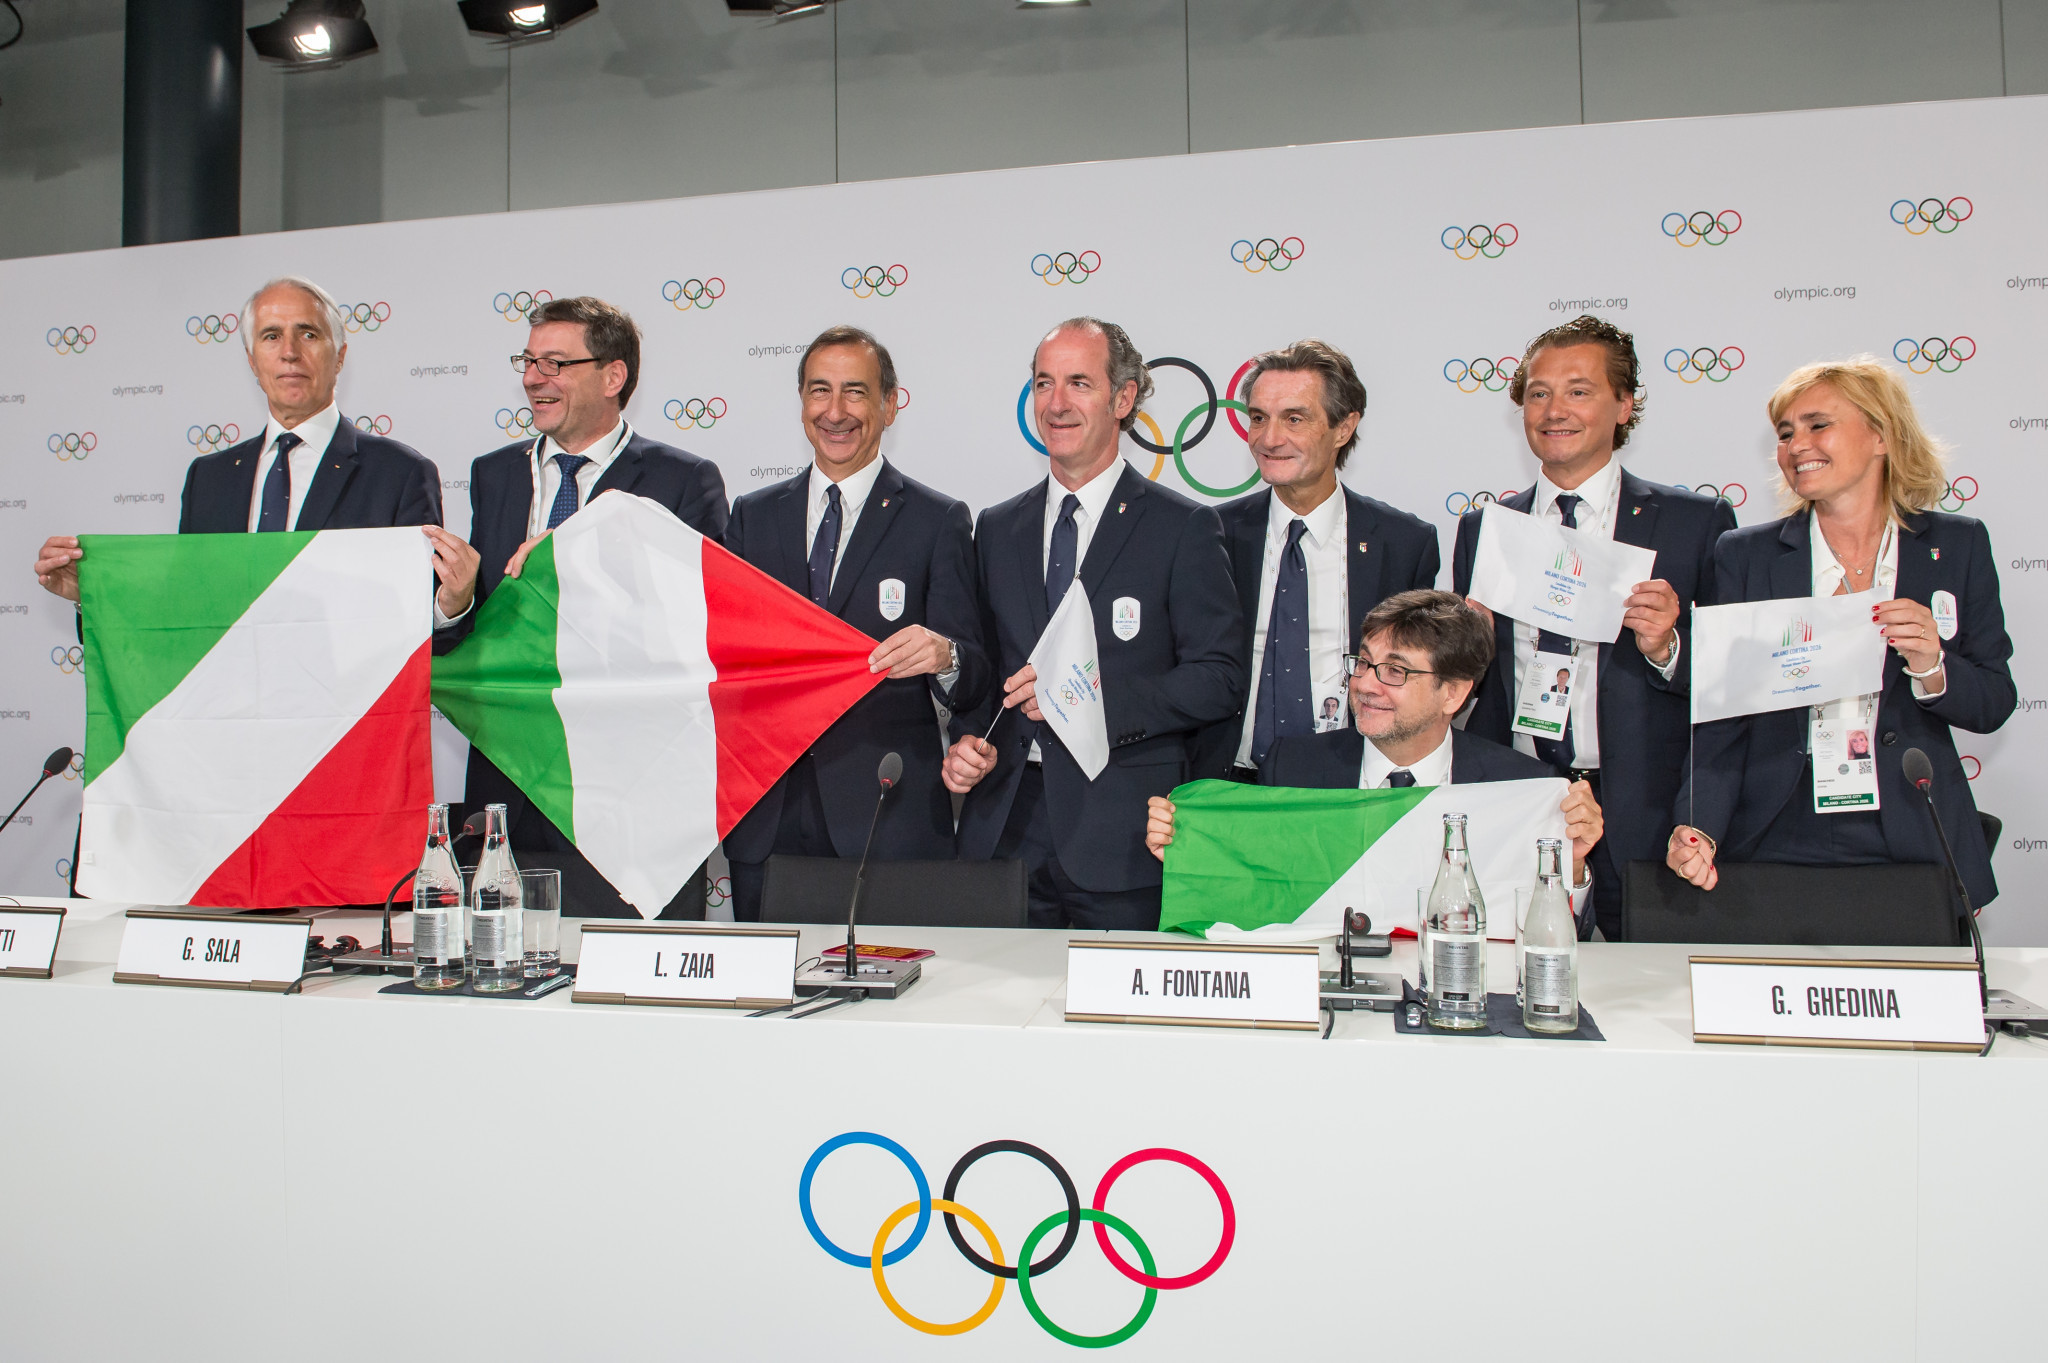 CONI to hand out awards to young people focusing on Milan Cortina 2026 Olympics